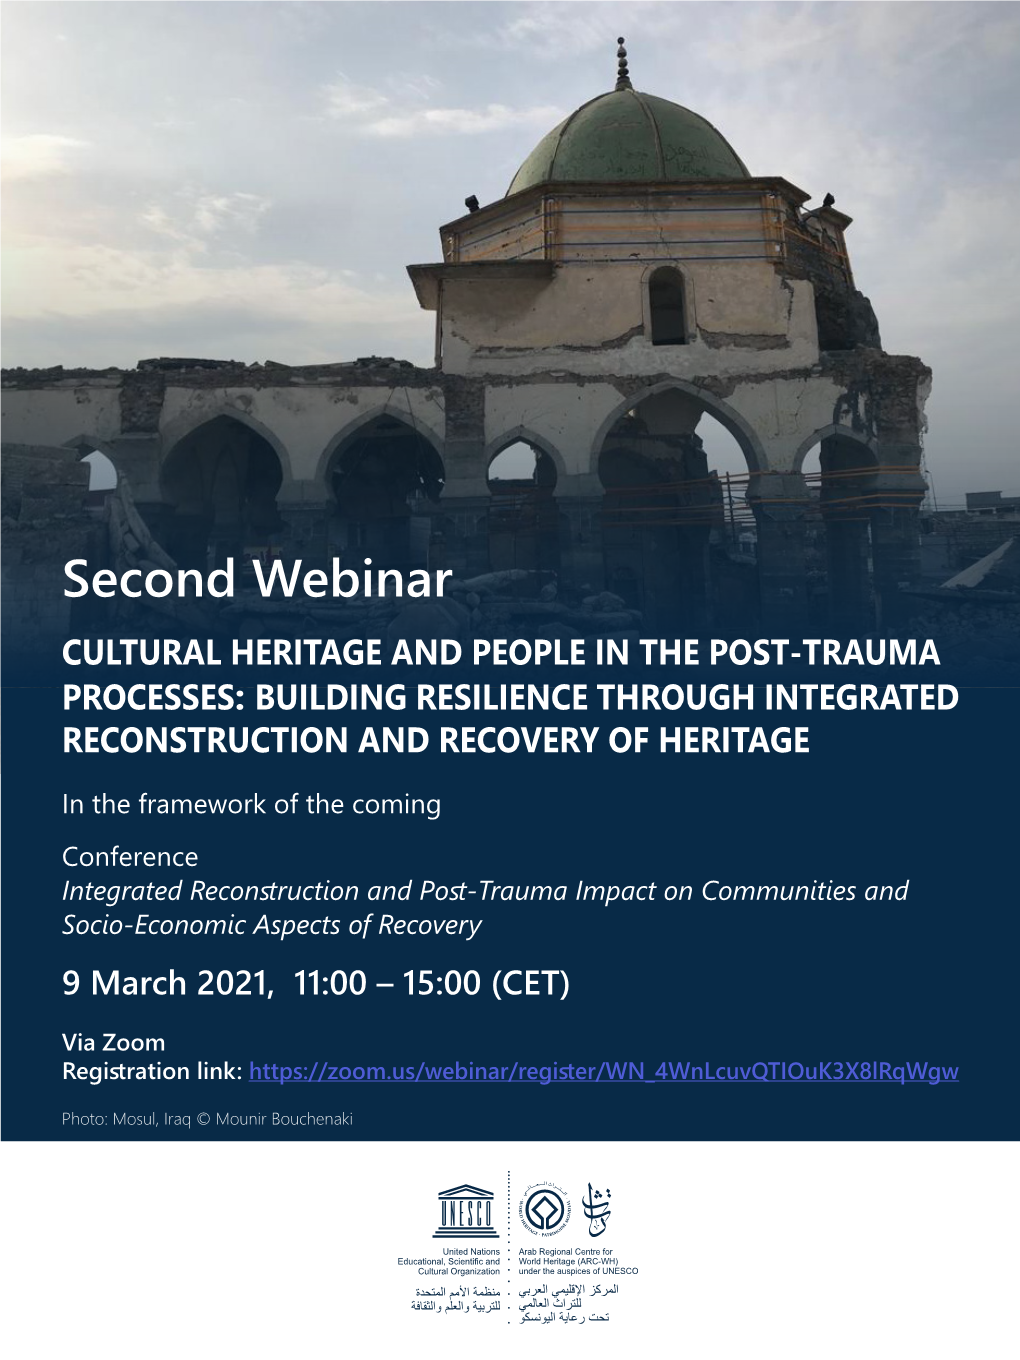 Second Webinar CULTURAL HERITAGE and PEOPLE in the POST-TRAUMA PROCESSES: BUILDING RESILIENCE THROUGH INTEGRATED RECONSTRUCTION and RECOVERY of HERITAGE